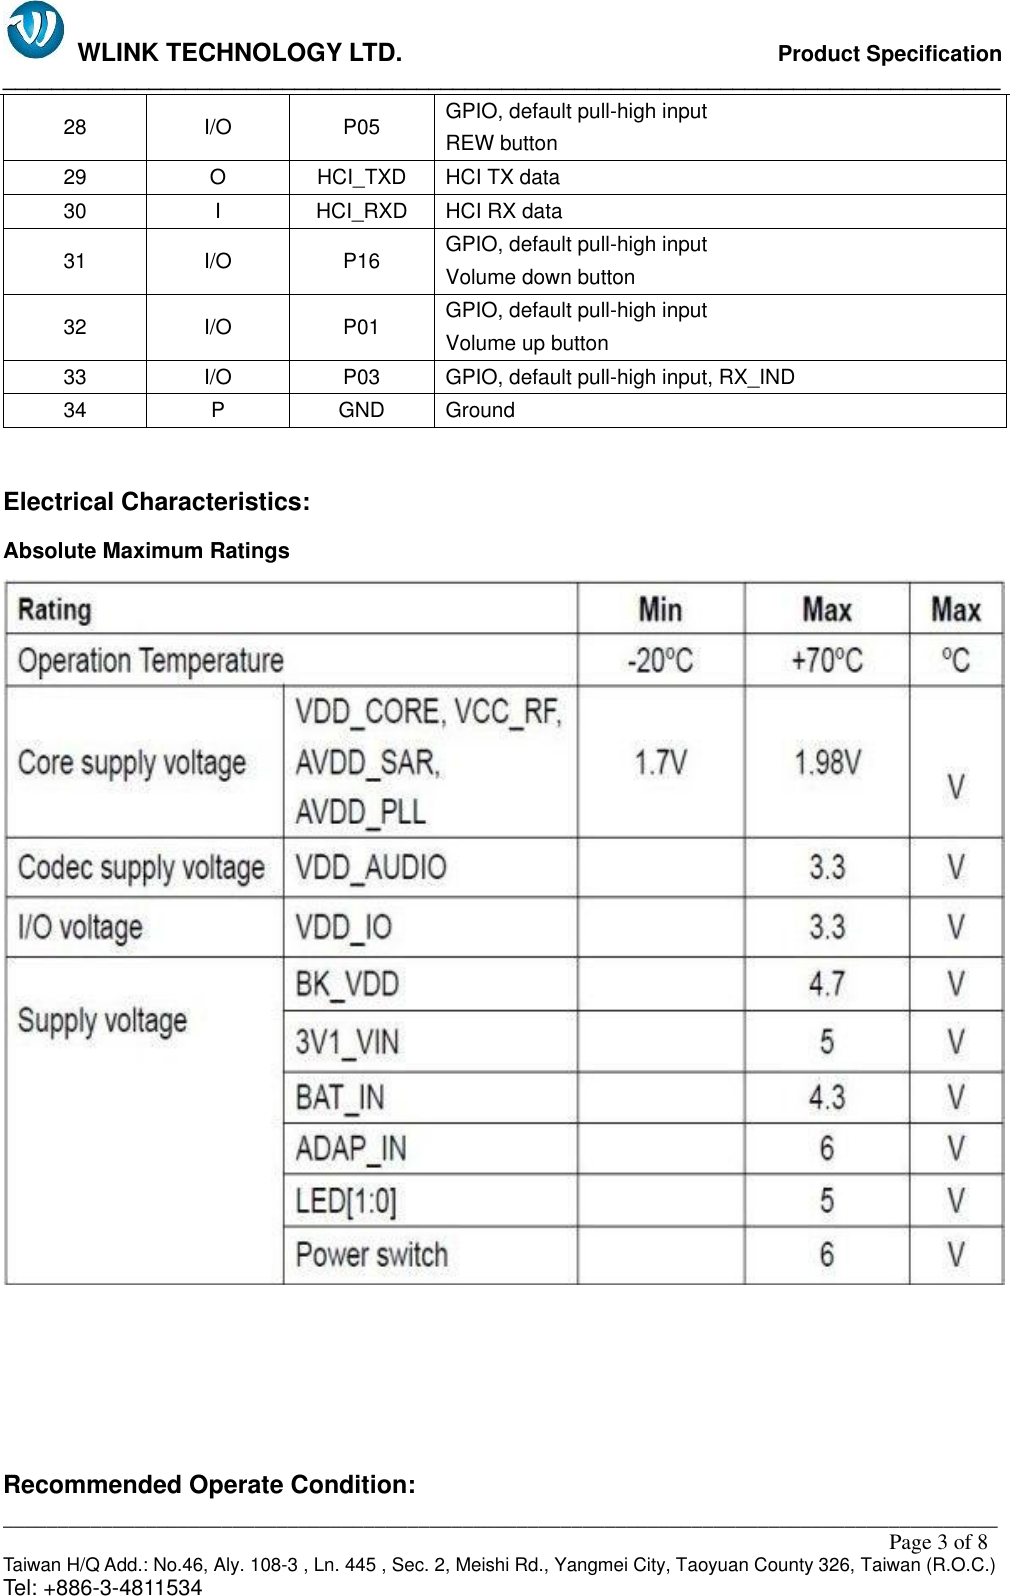   WLINK TECHNOLOGY LTD.                              Product Specification __________________________________________________________________________________ ___________________________________________________________________________________________                                                                                                                                                         Page 3 of 8 Taiwan H/Q Add.: No.46, Aly. 108-3 , Ln. 445 , Sec. 2, Meishi Rd., Yangmei City, Taoyuan County 326, Taiwan (R.O.C.)   Tel: +886-3-4811534 28 I/O P05 GPIO, default pull-high input                                                 REW button 29 O HCI_TXD HCI TX data 30 I HCI_RXD HCI RX data 31 I/O P16 GPIO, default pull-high input Volume down button 32 I/O P01 GPIO, default pull-high input Volume up button 33 I/O P03 GPIO, default pull-high input, RX_IND 34 P GND Ground  Electrical Characteristics: Absolute Maximum Ratings      Recommended Operate Condition: 